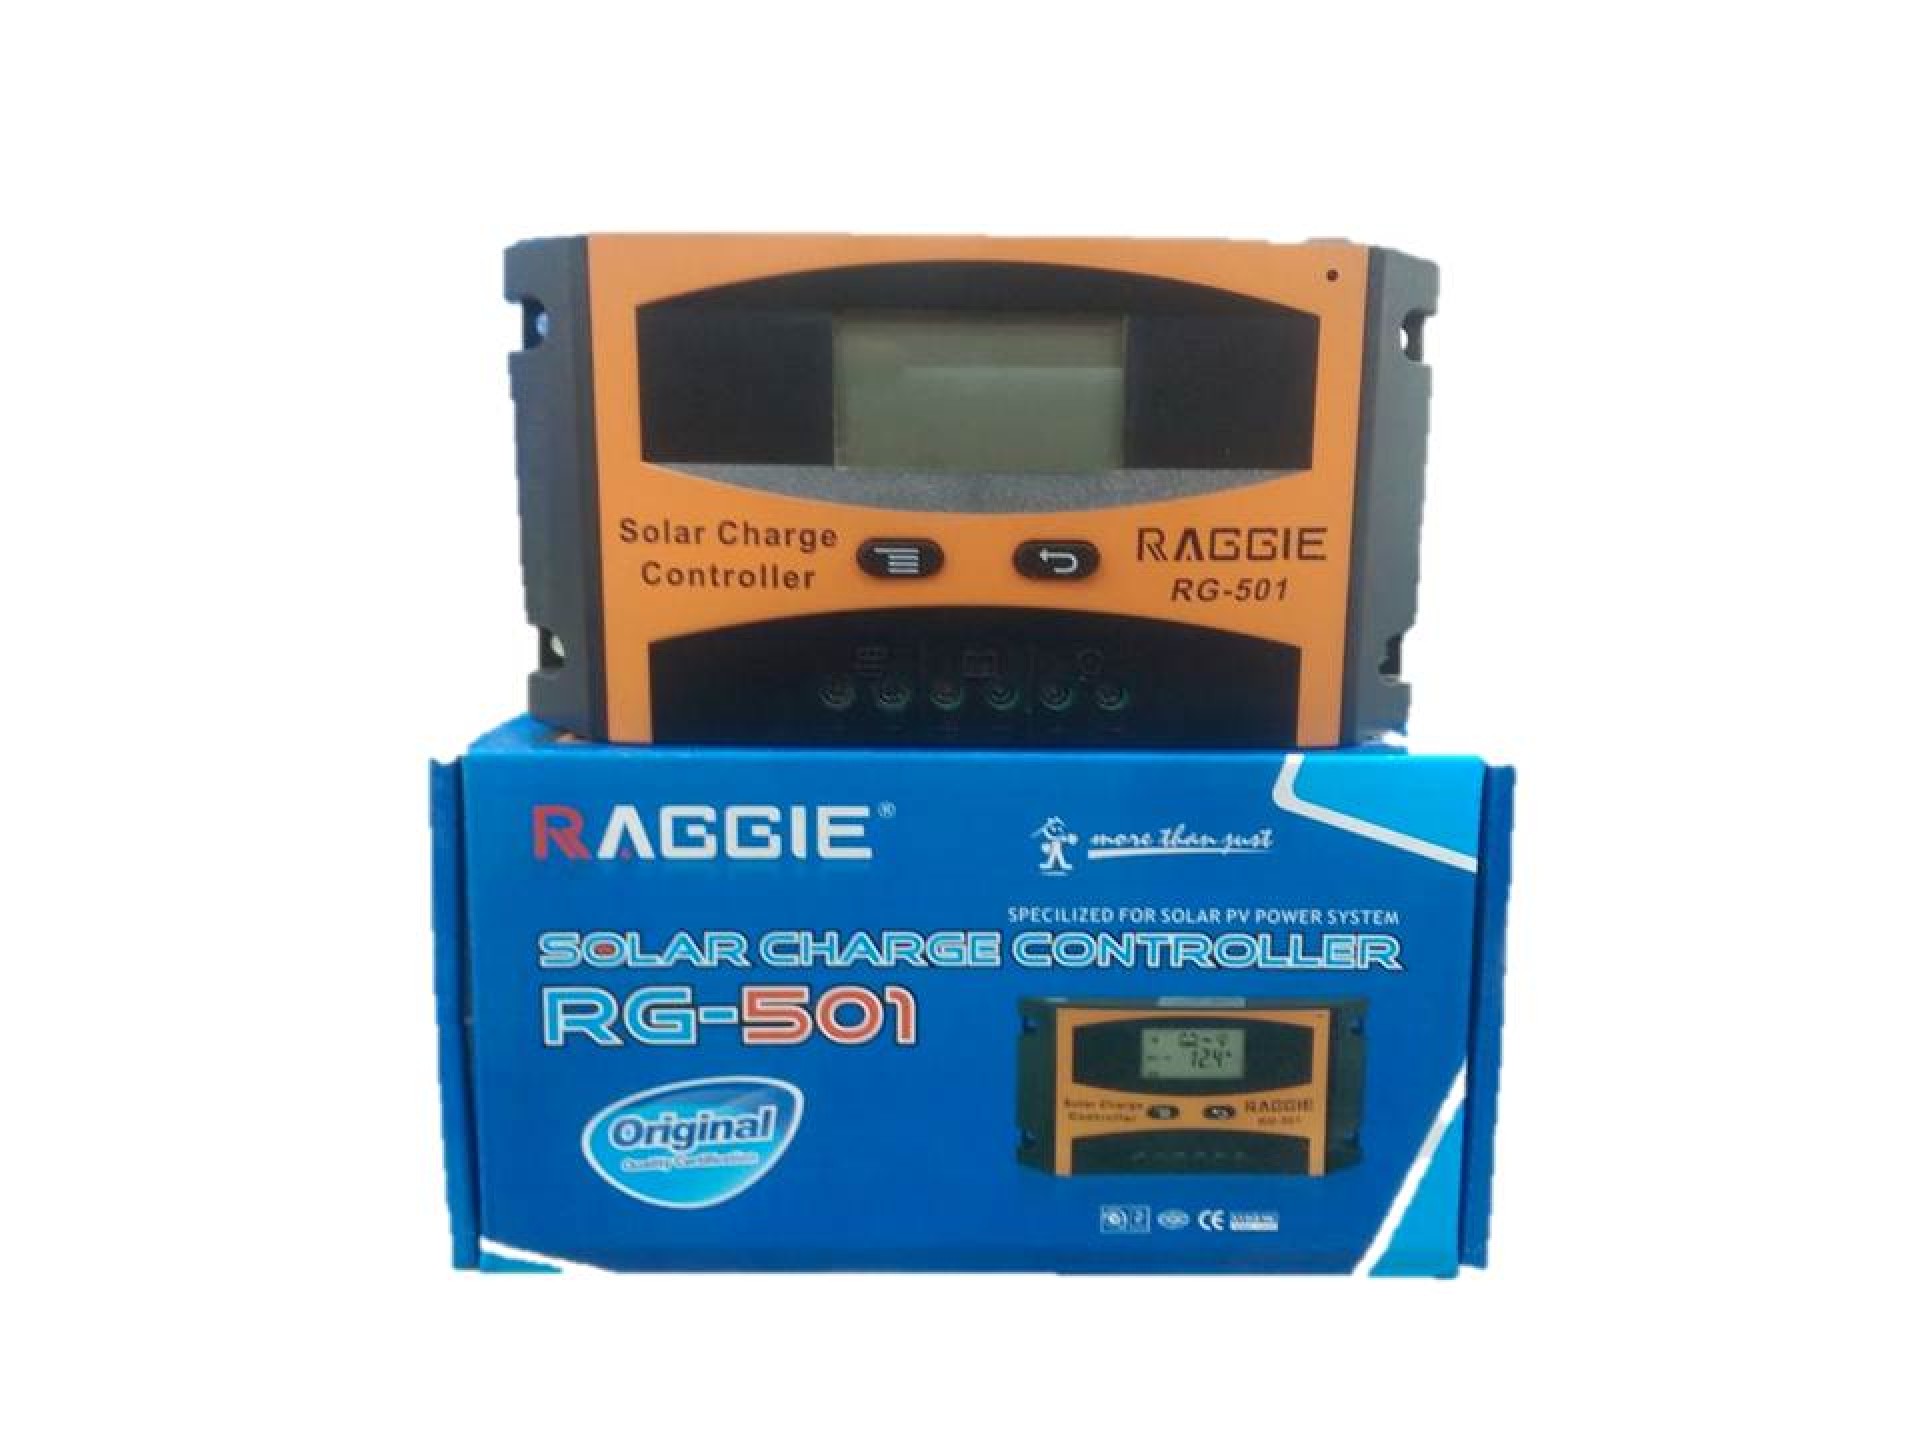 RAGGIE SOLAR CHARGE CONTROLLER